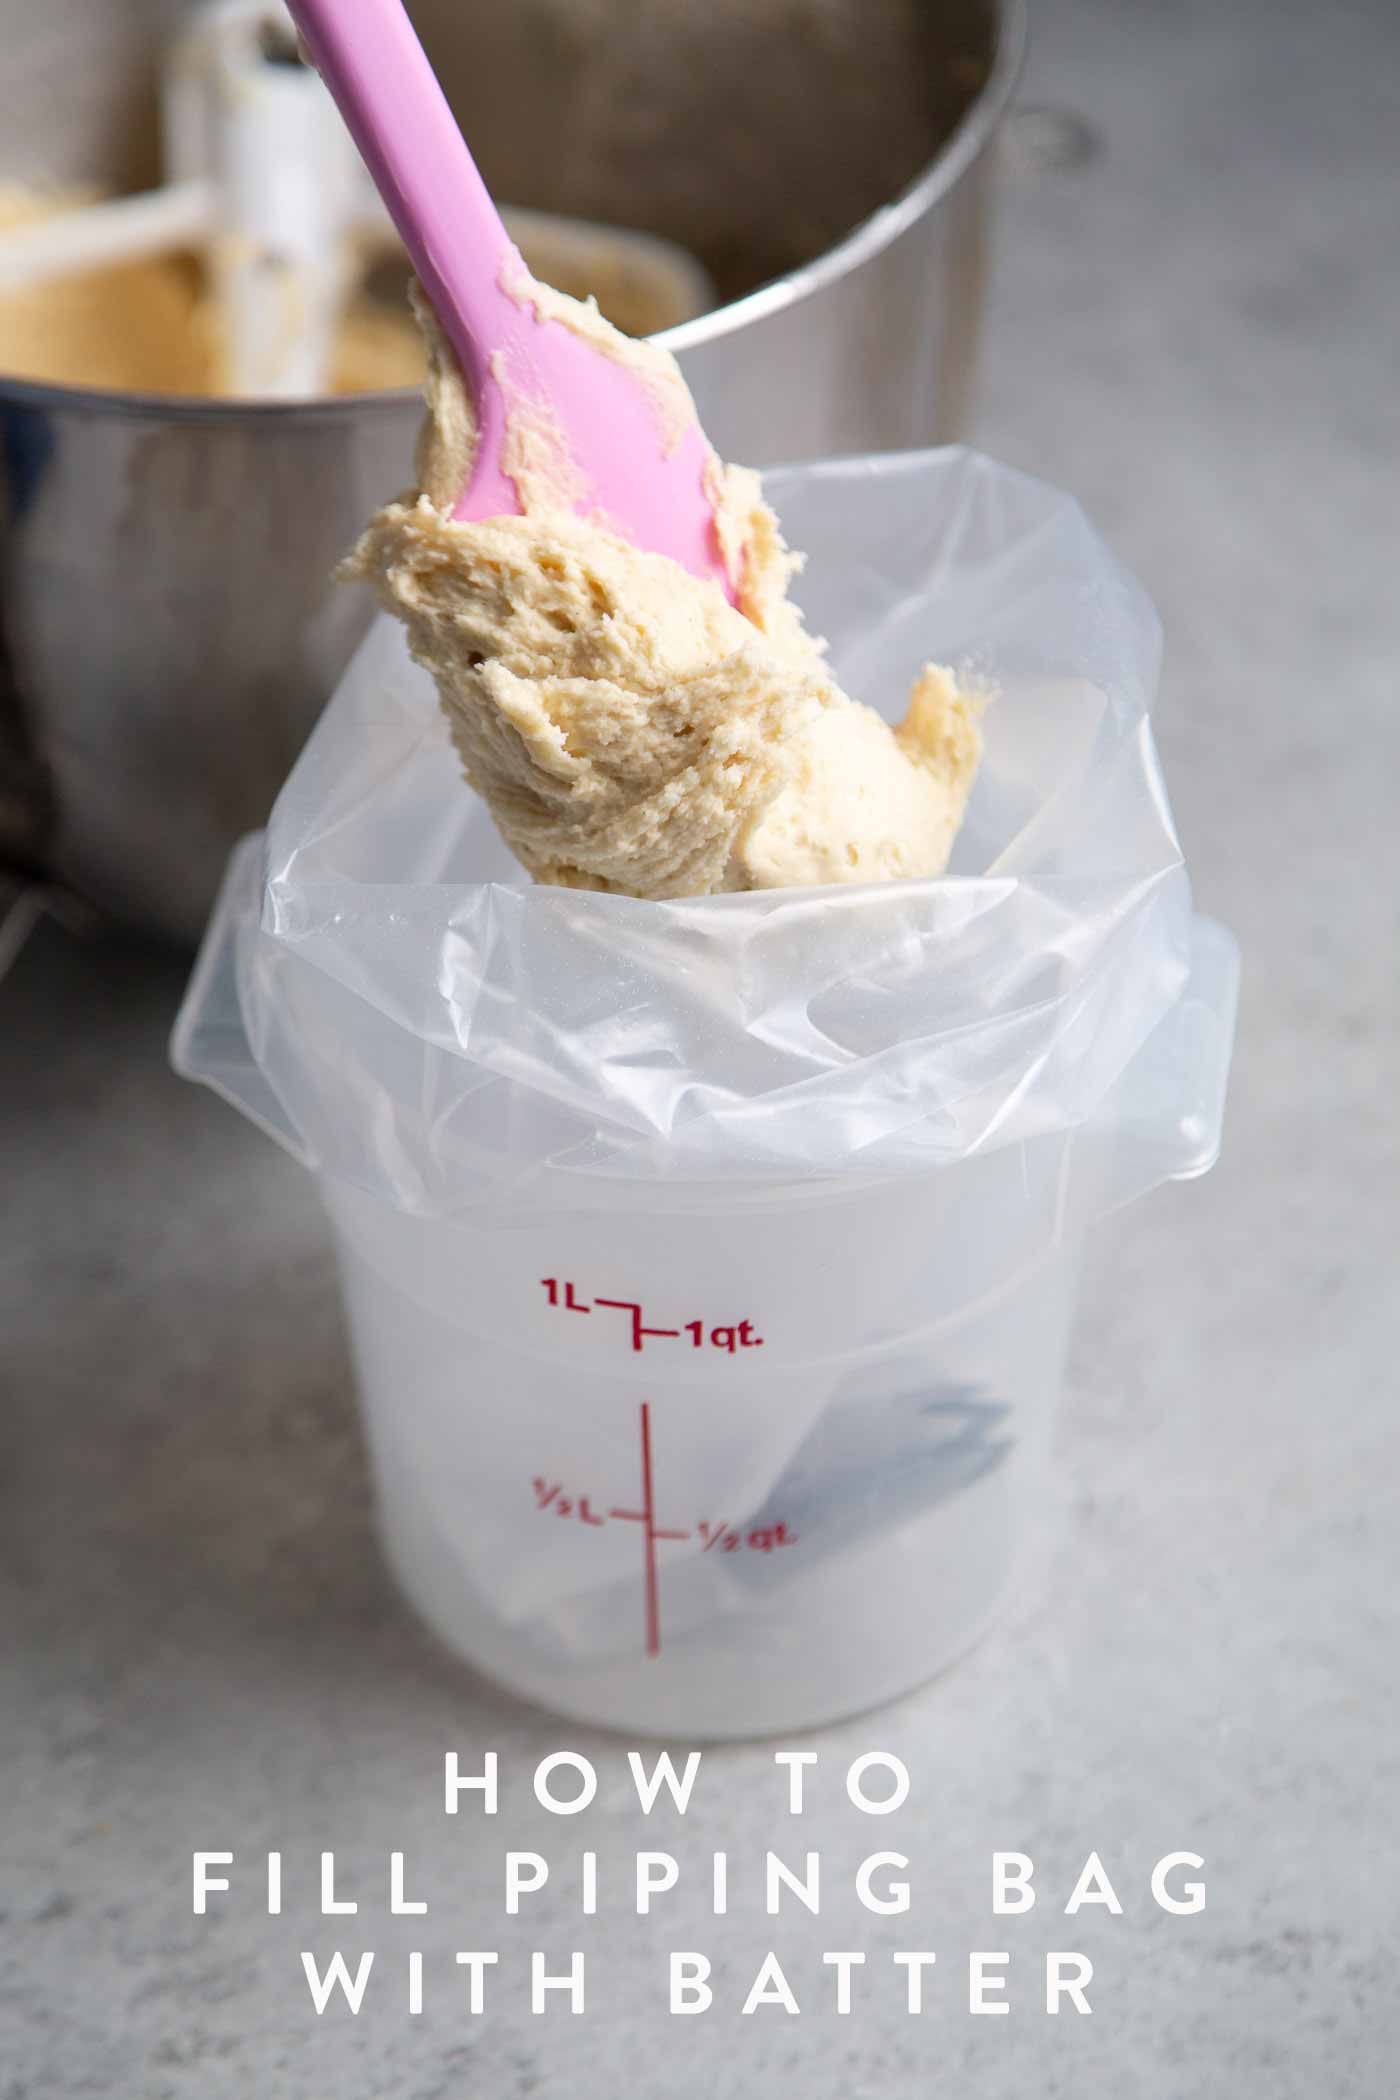 How to Fill Piping Bag with Cookie Batter